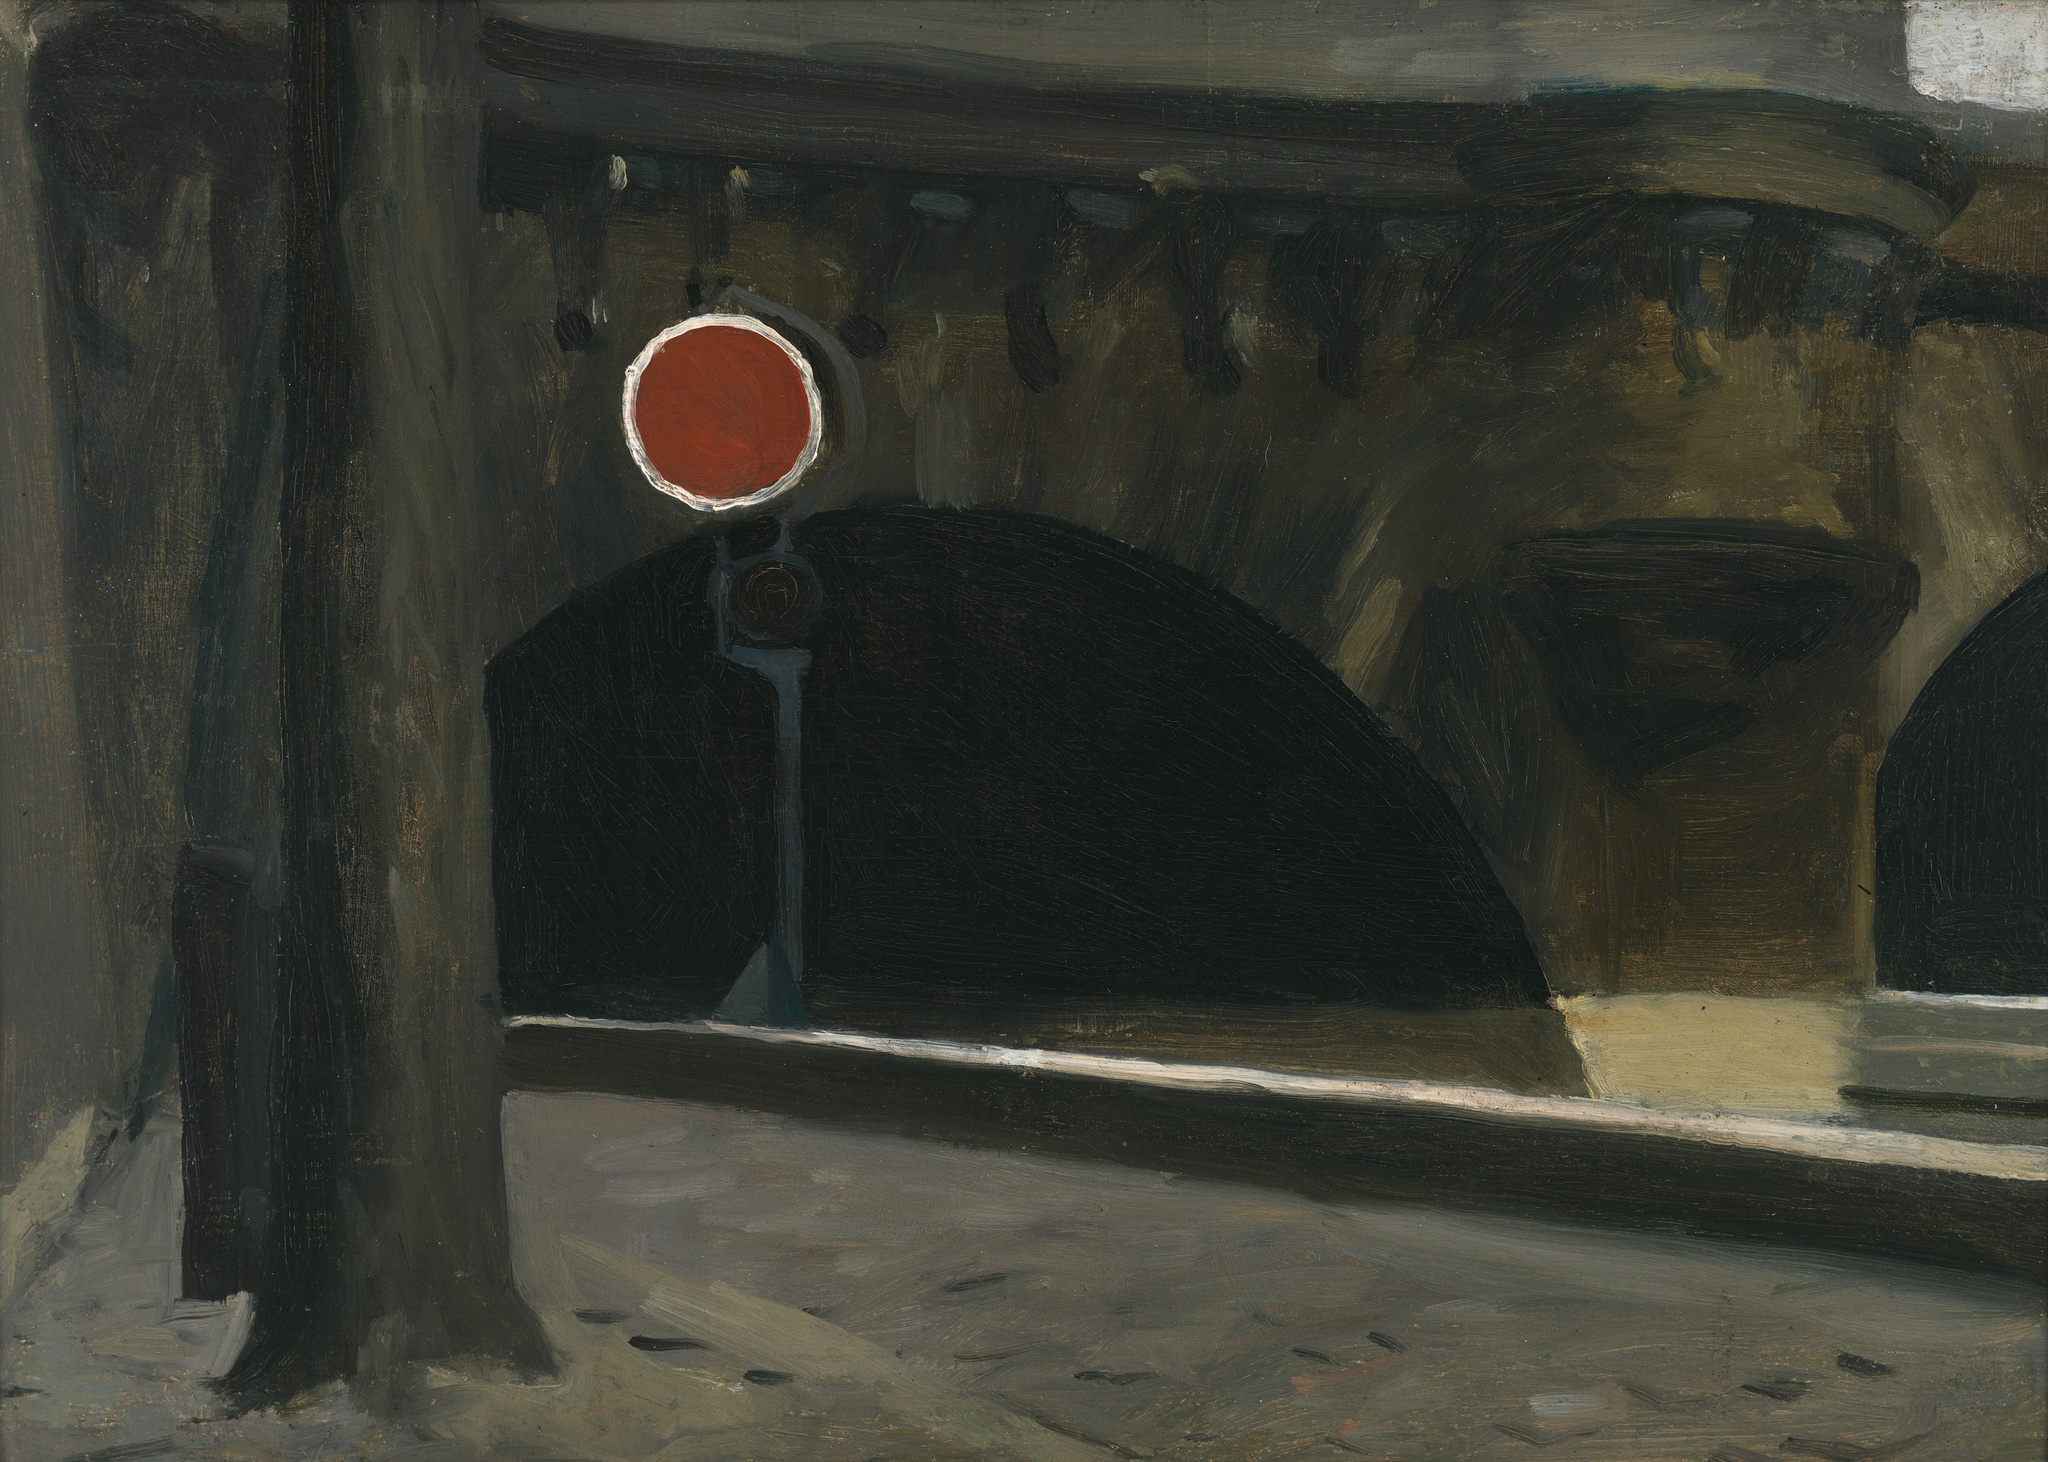 The arched entryway of a dark tunnel behind a bright red, round traffic sign.